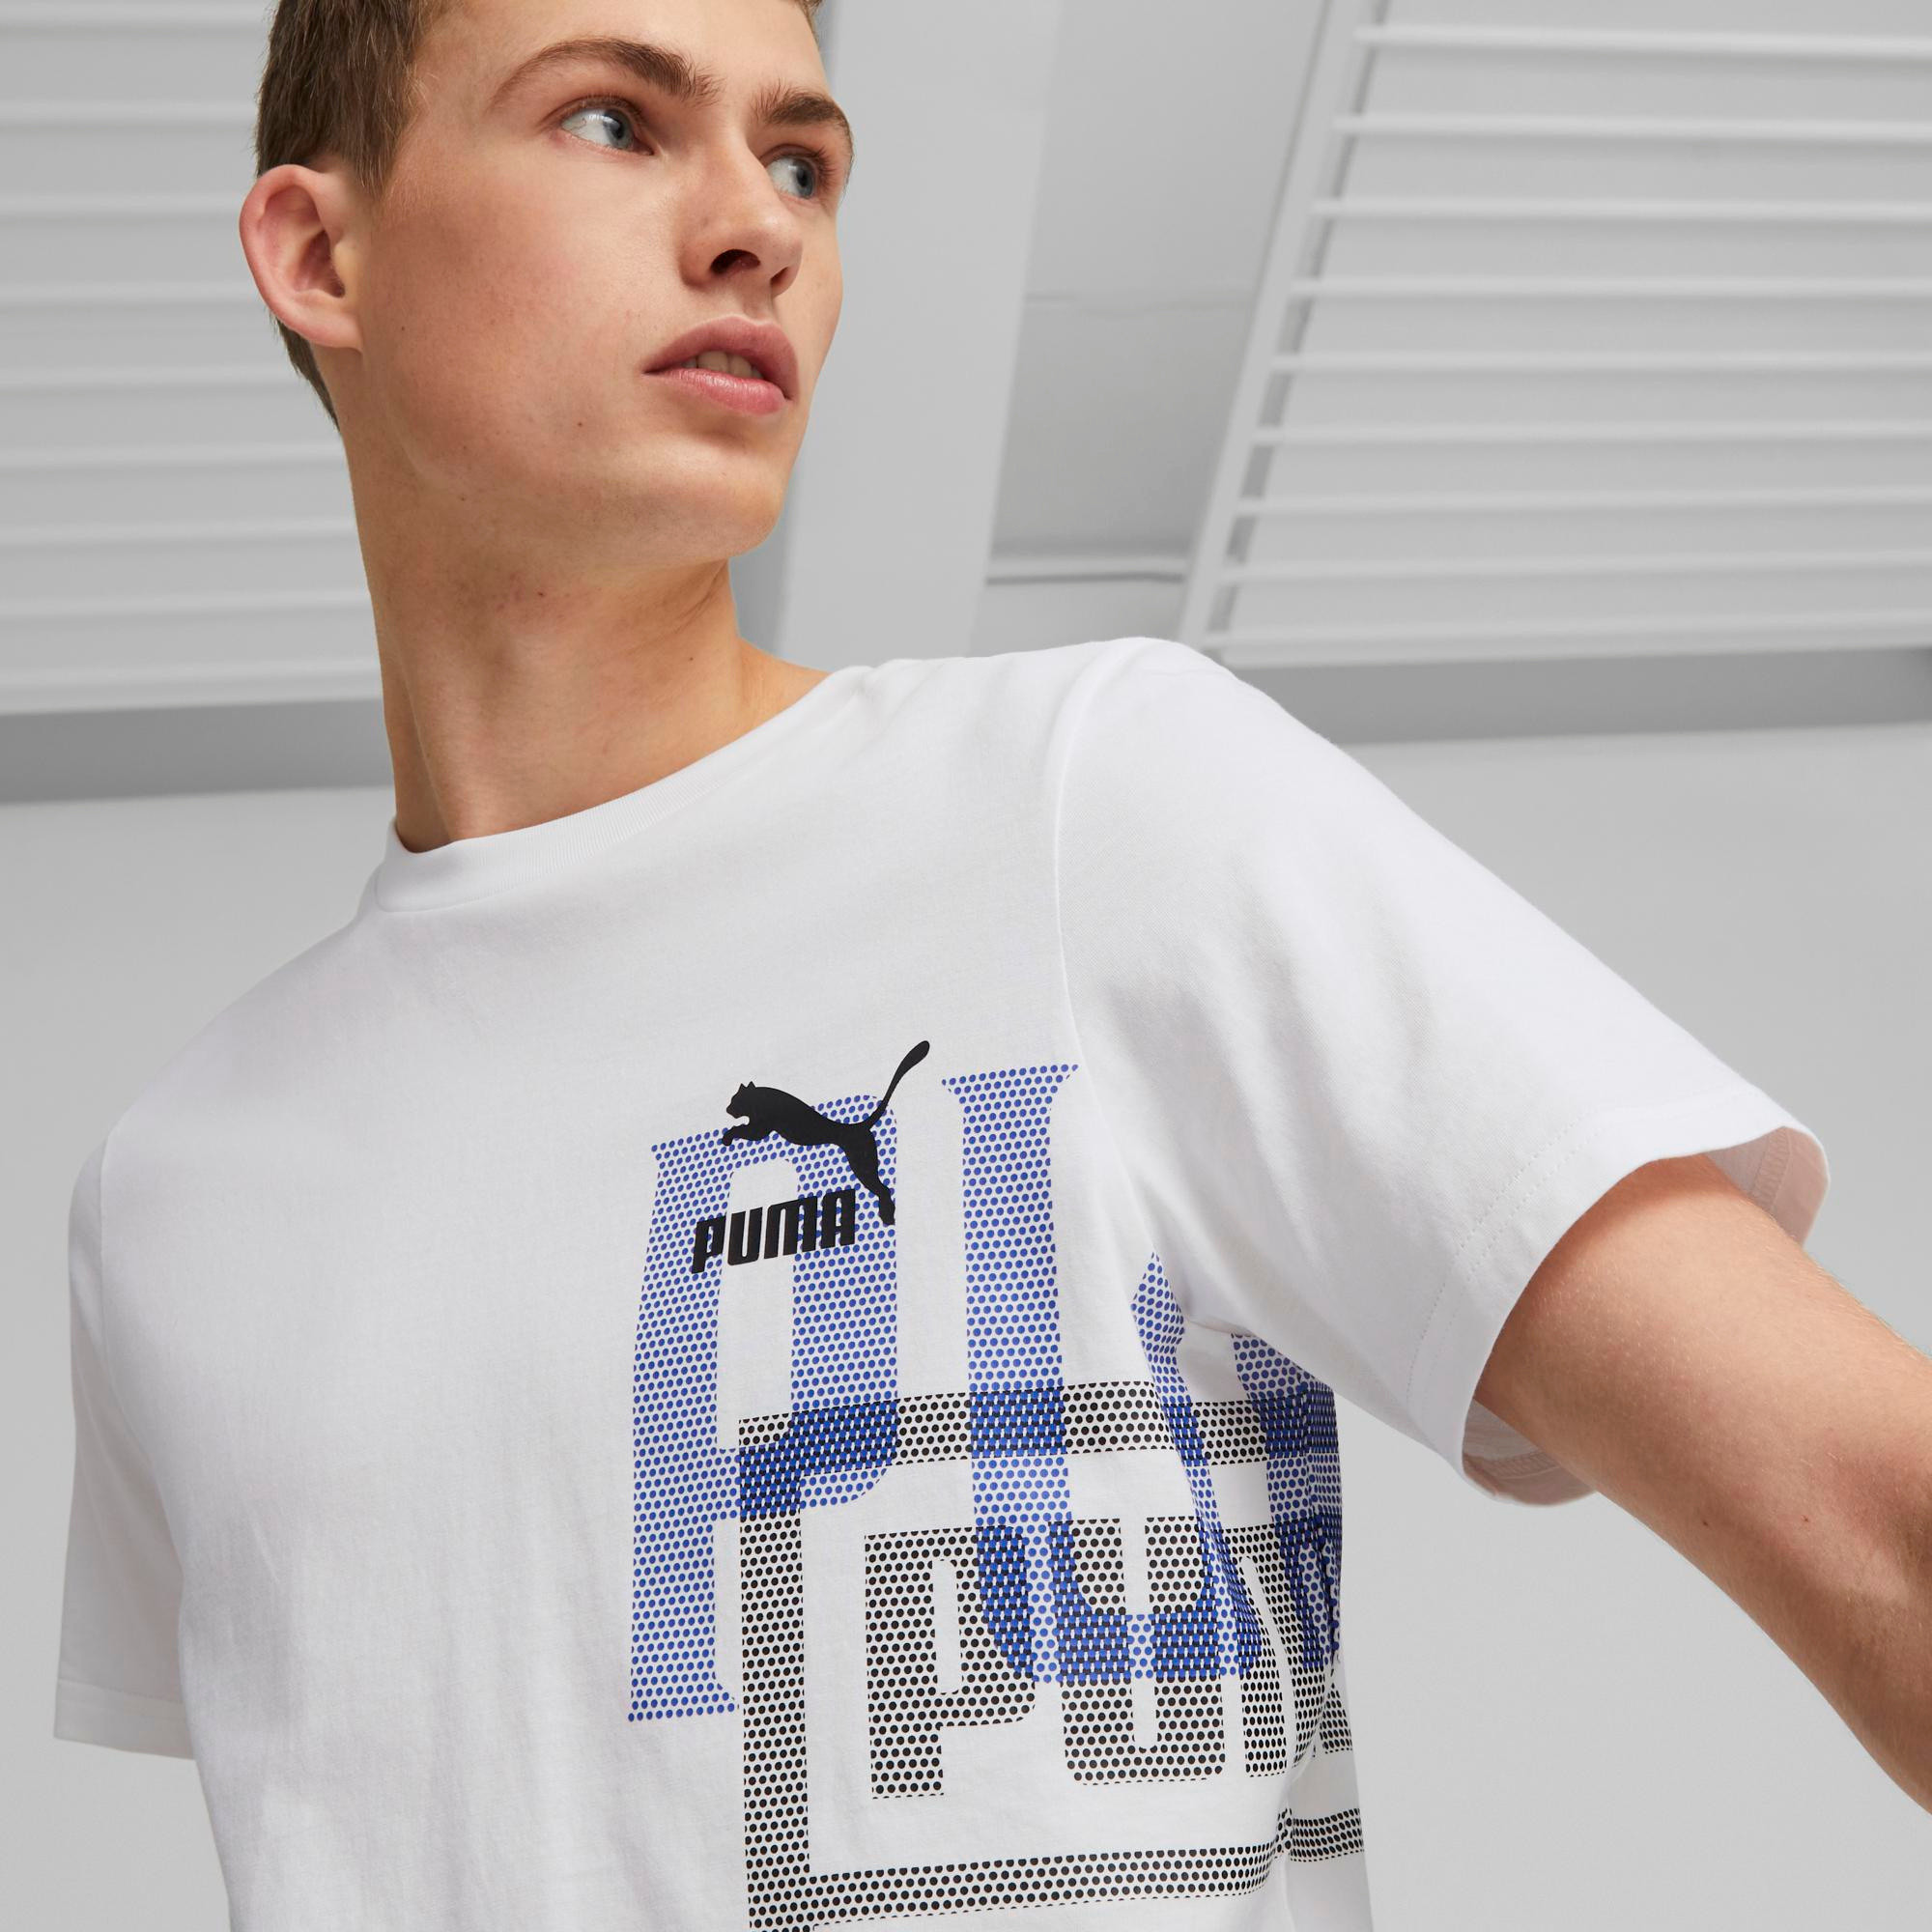 Puma - T-shirt in cotone con logo, Bianco, large image number 5